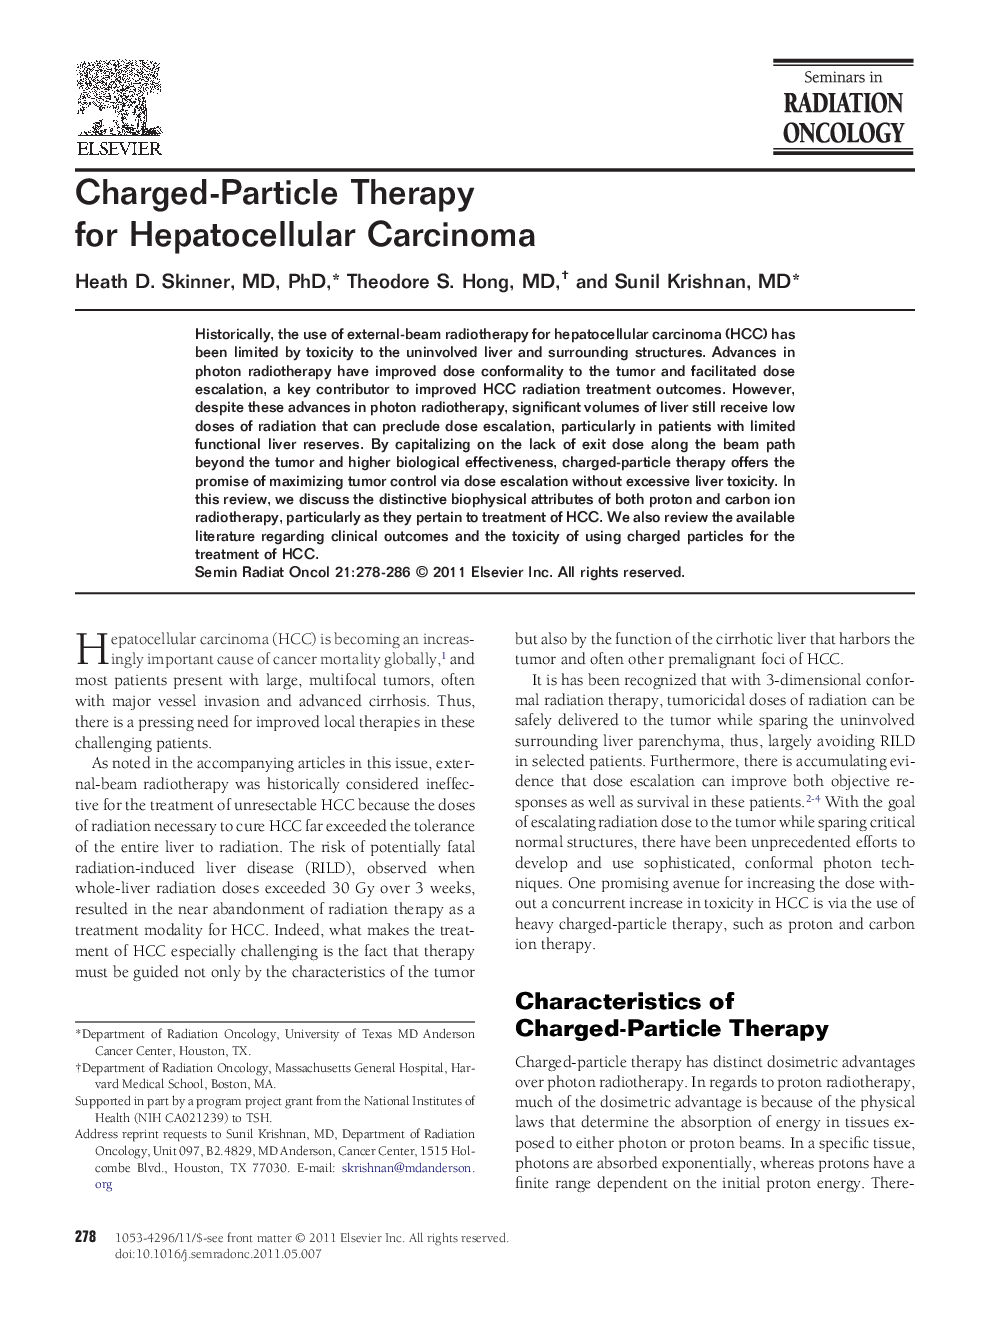 Charged-Particle Therapy for Hepatocellular Carcinoma 